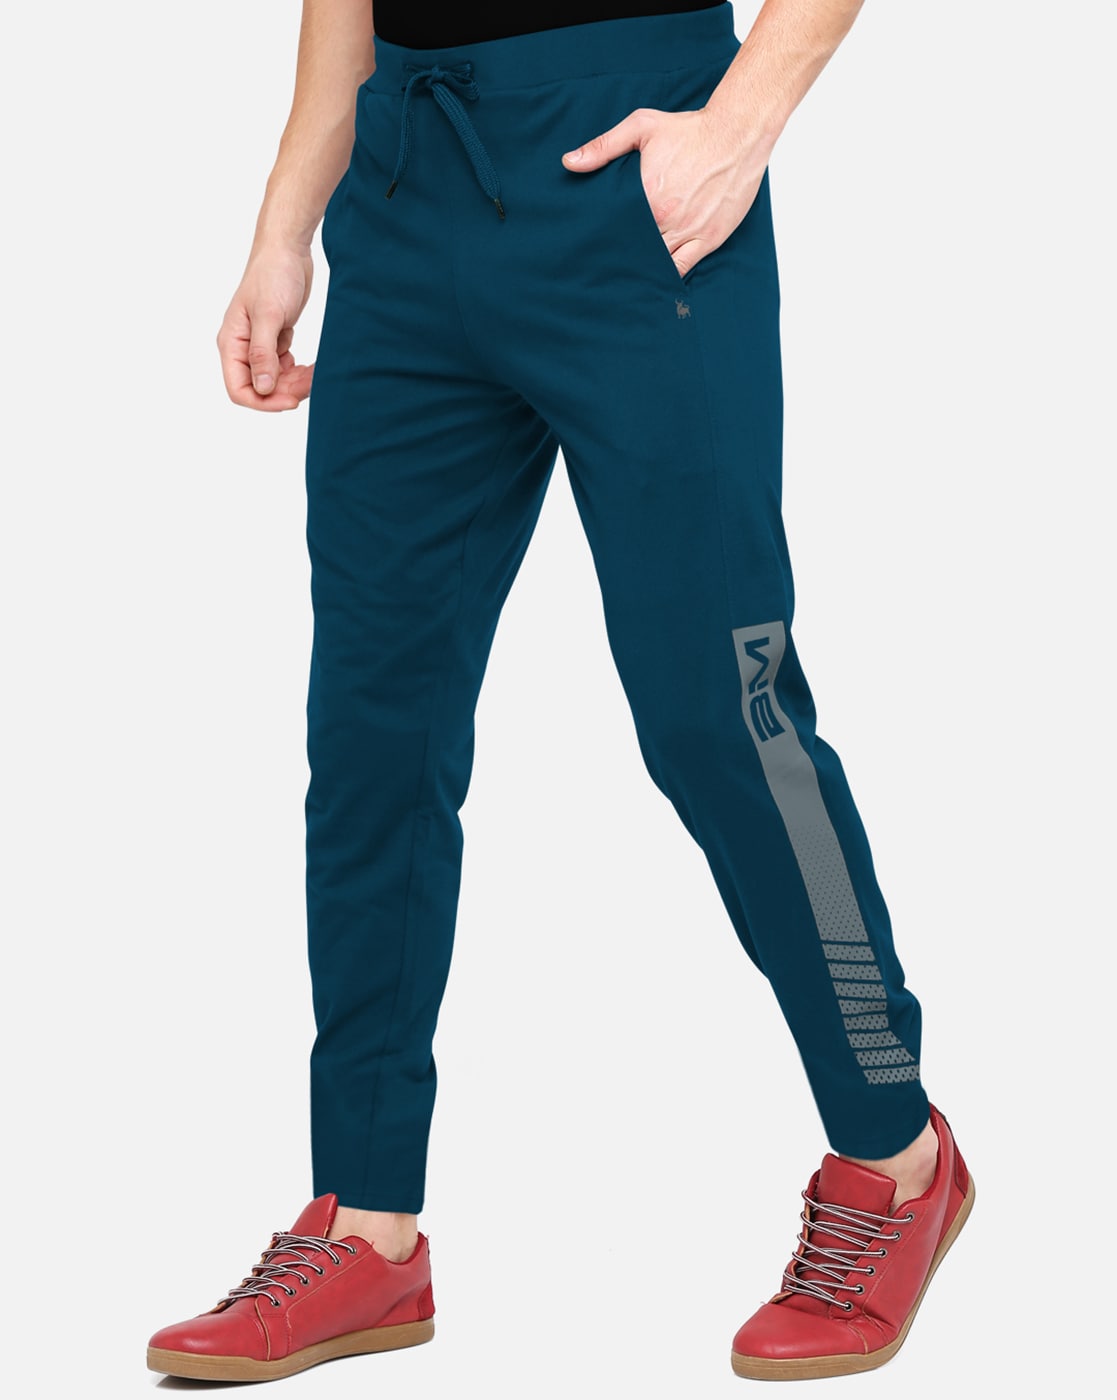 Casual Track Pants - Buy Casual Track Pants Online Starting at Just ₹210 |  Meesho